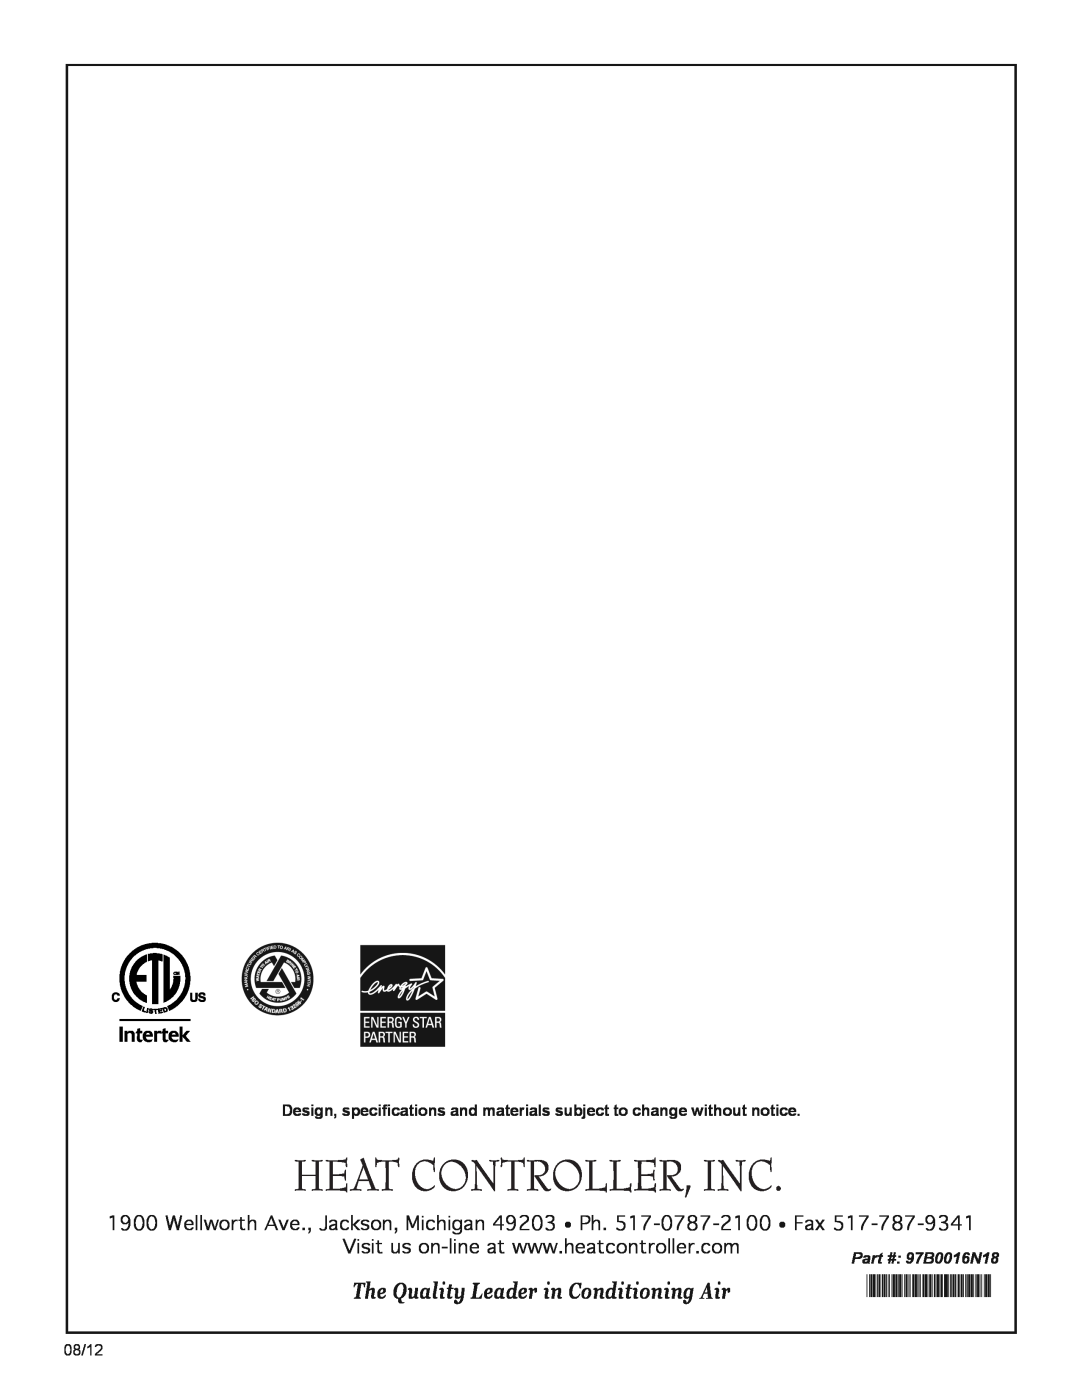 Heat Controller HTS SERIES manual The Quality Leader in Conditioning Air, Part #: 97B0016N18, Dard, Ied To, At Pump 